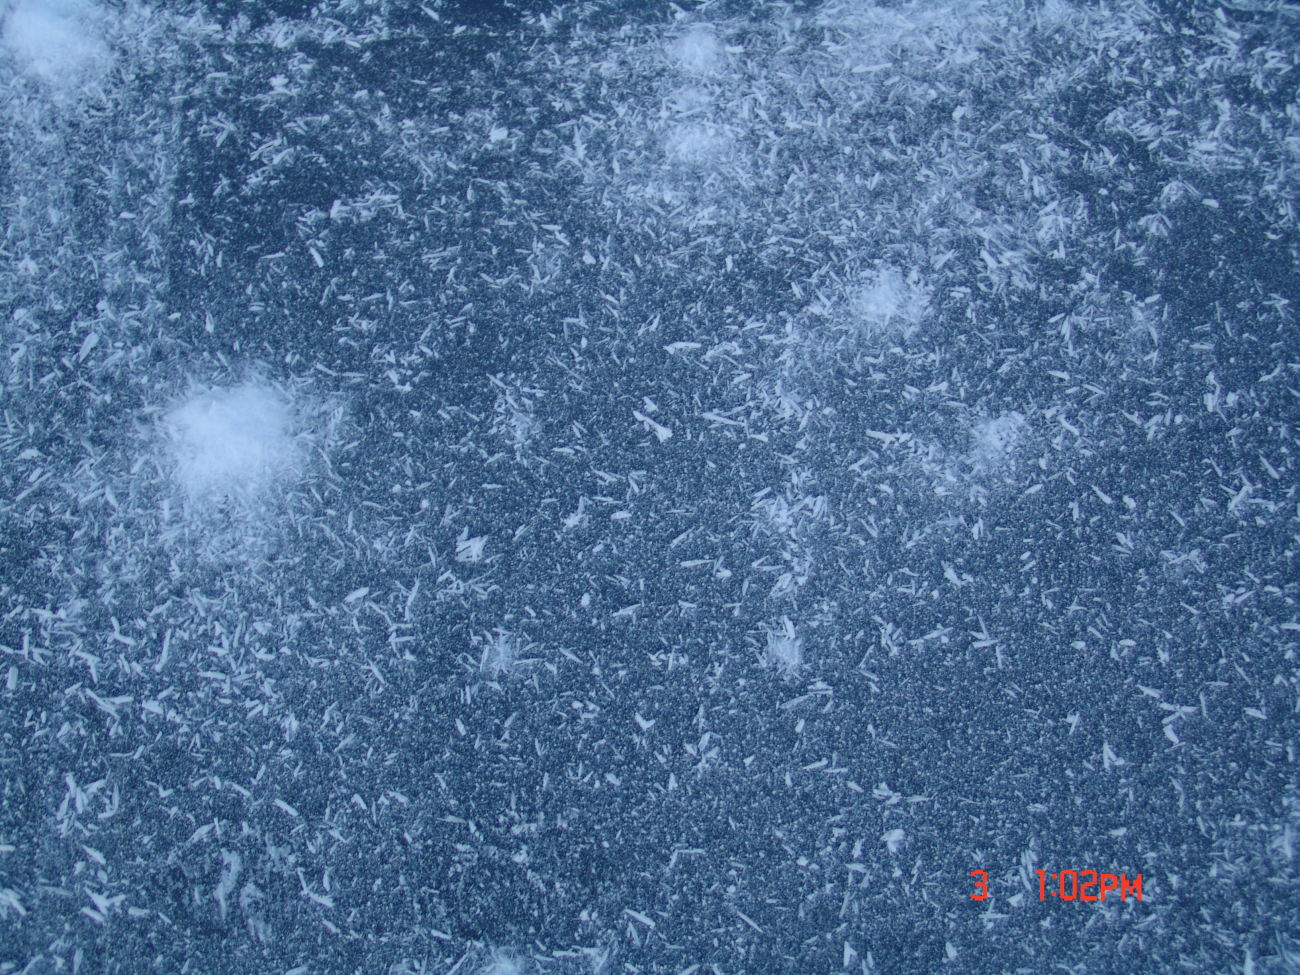 Short thick cylindrical ice crystals seemingly strewn about ice surface